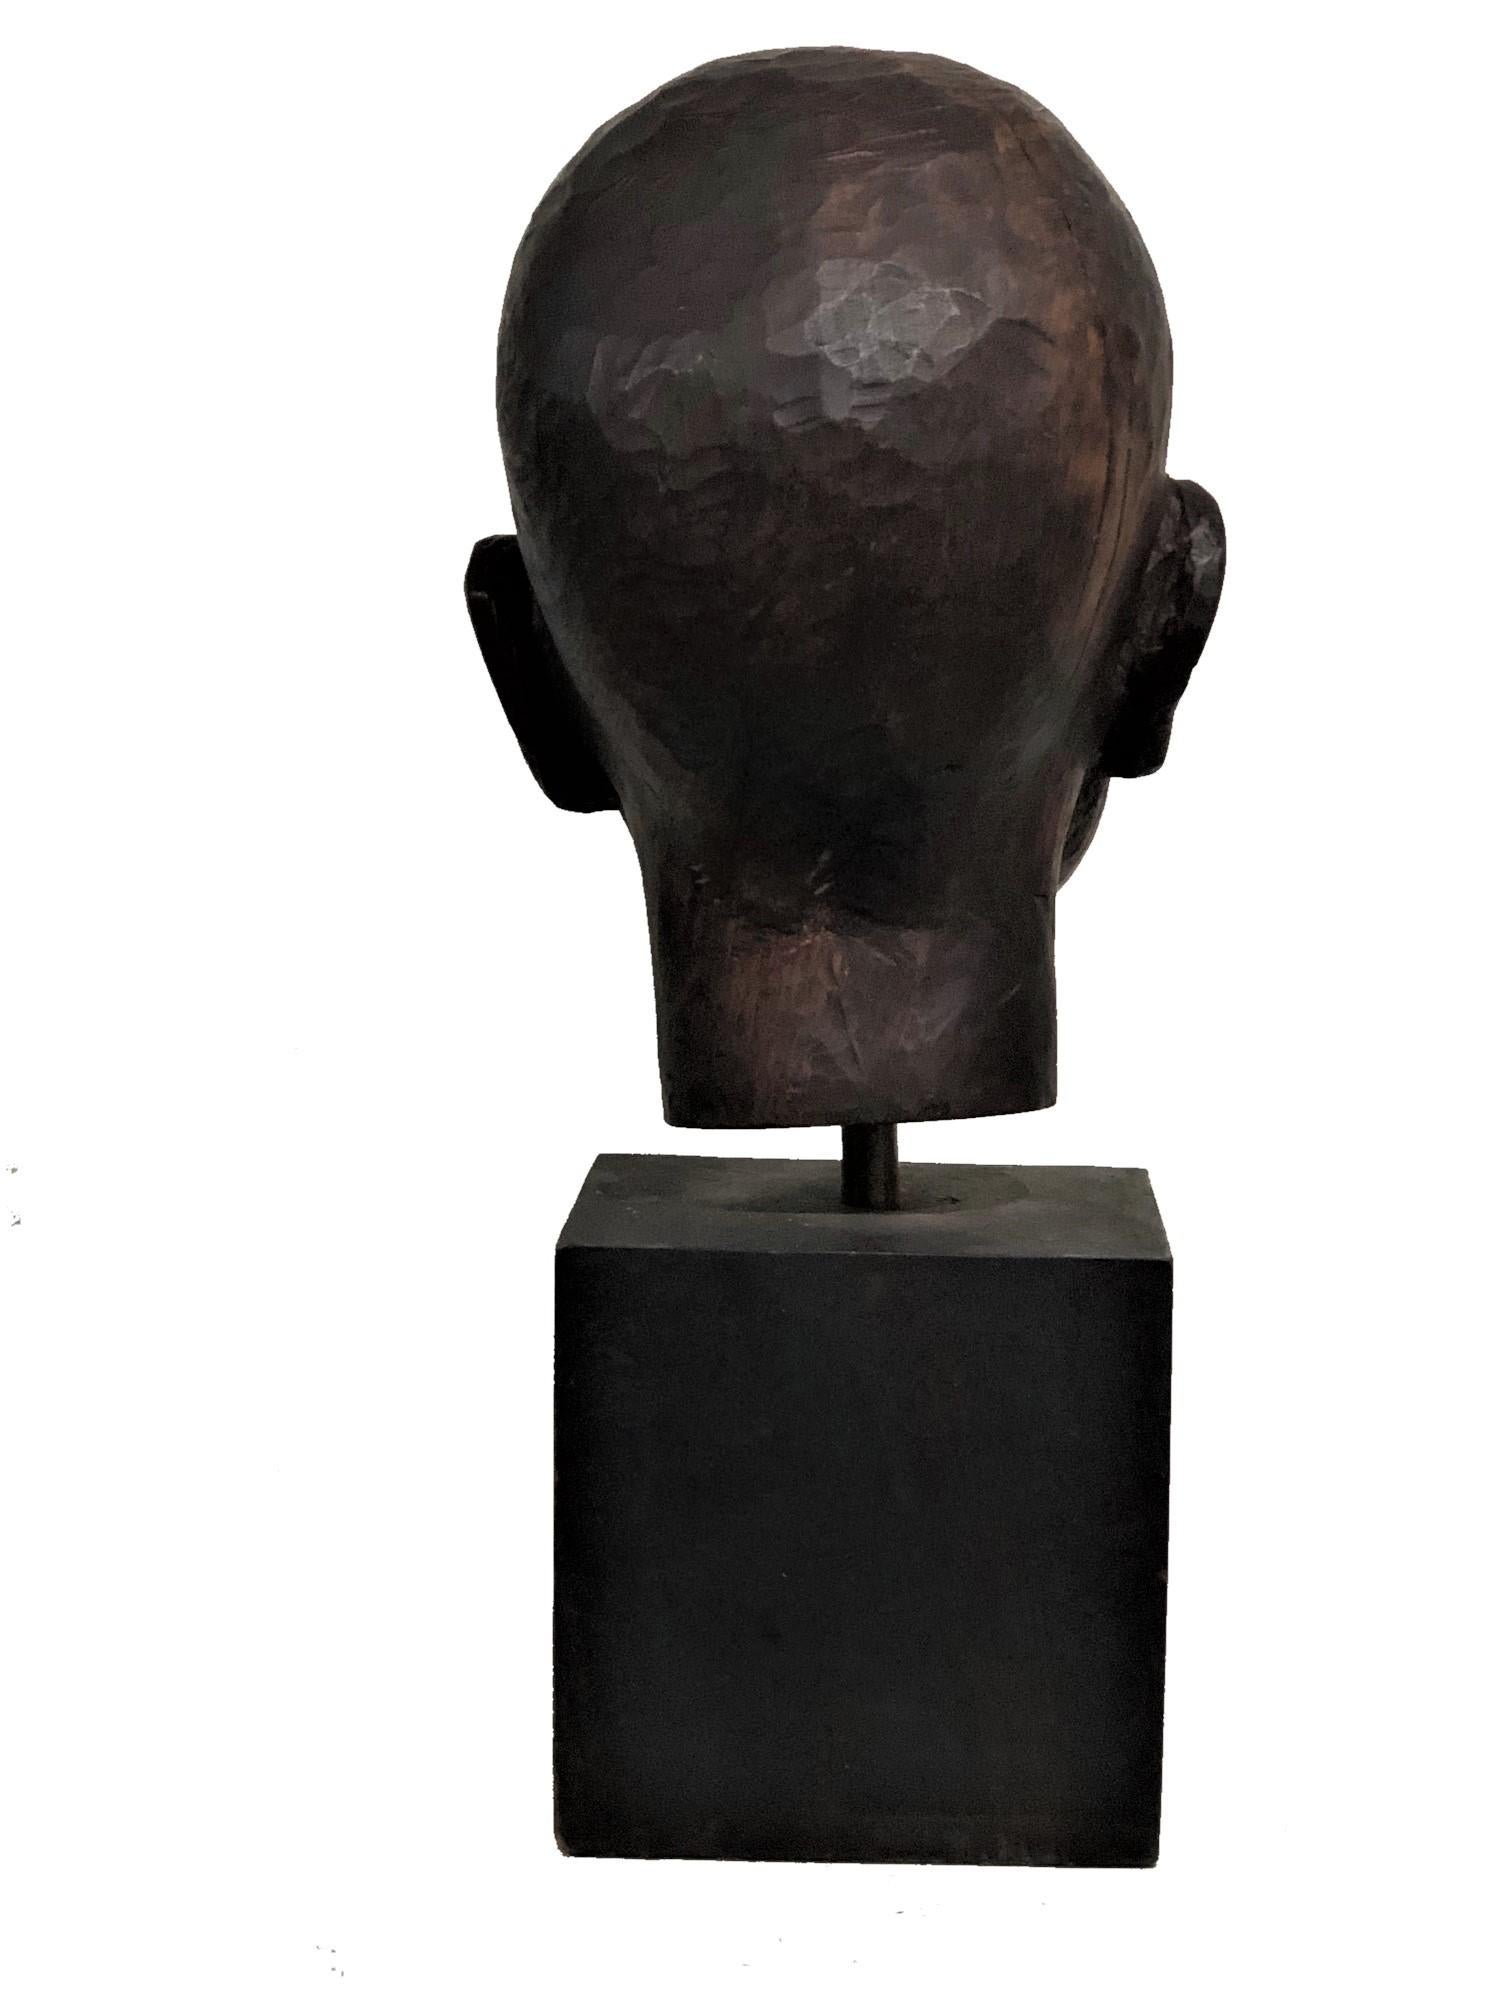 American Art Deco Carved Ebonized Wood Head Bust of a Young Boy, ca. 1940s For Sale 1